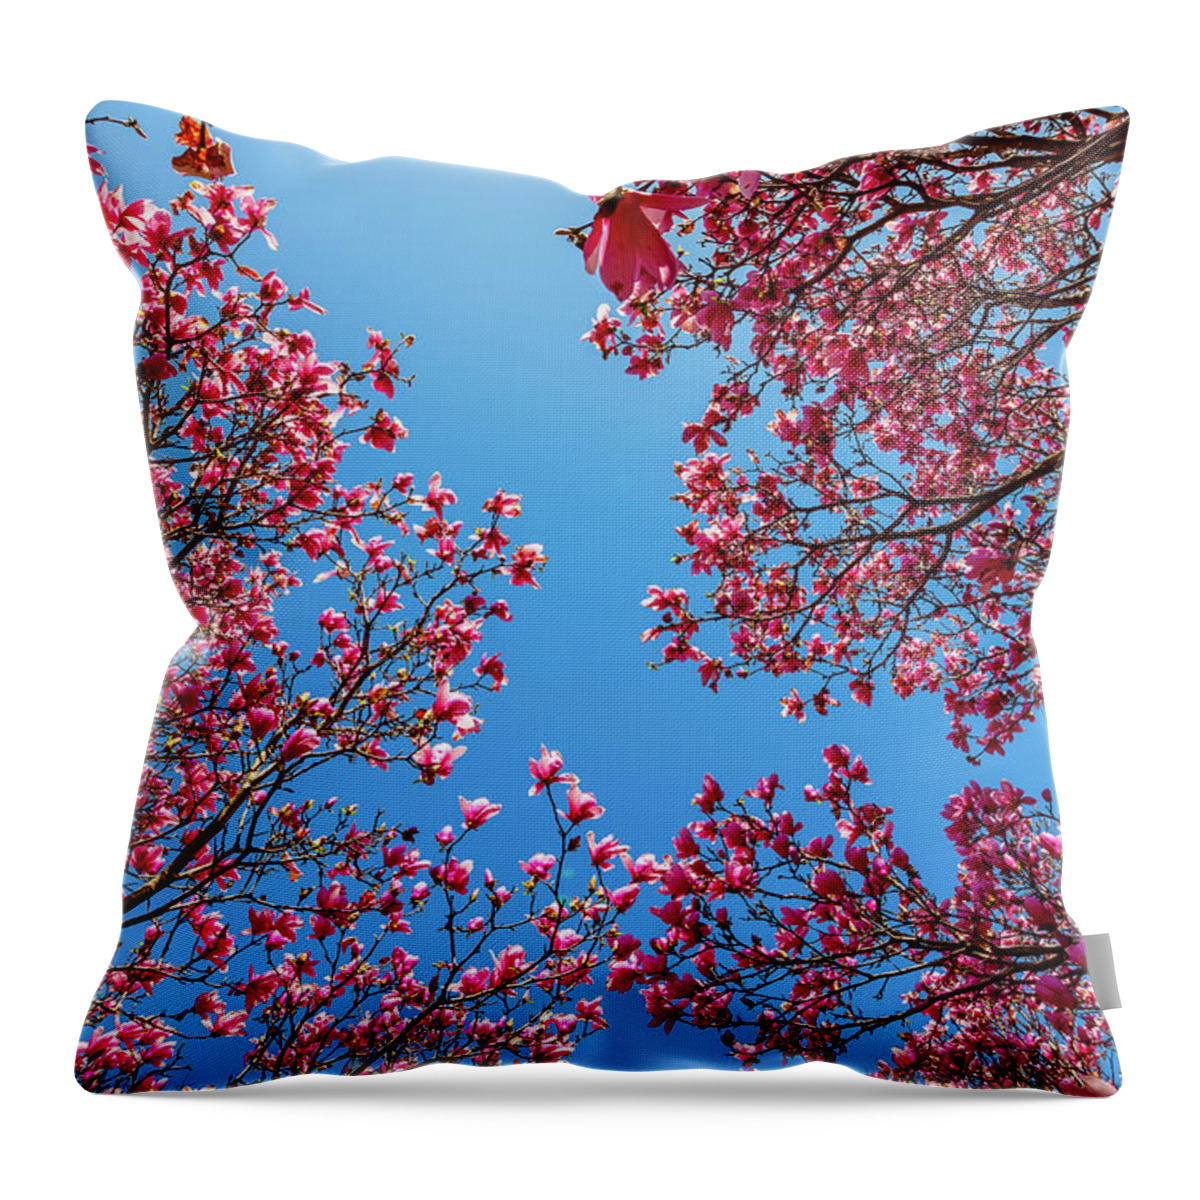 Magnolia Throw Pillow featuring the photograph Magnolia by David Beechum